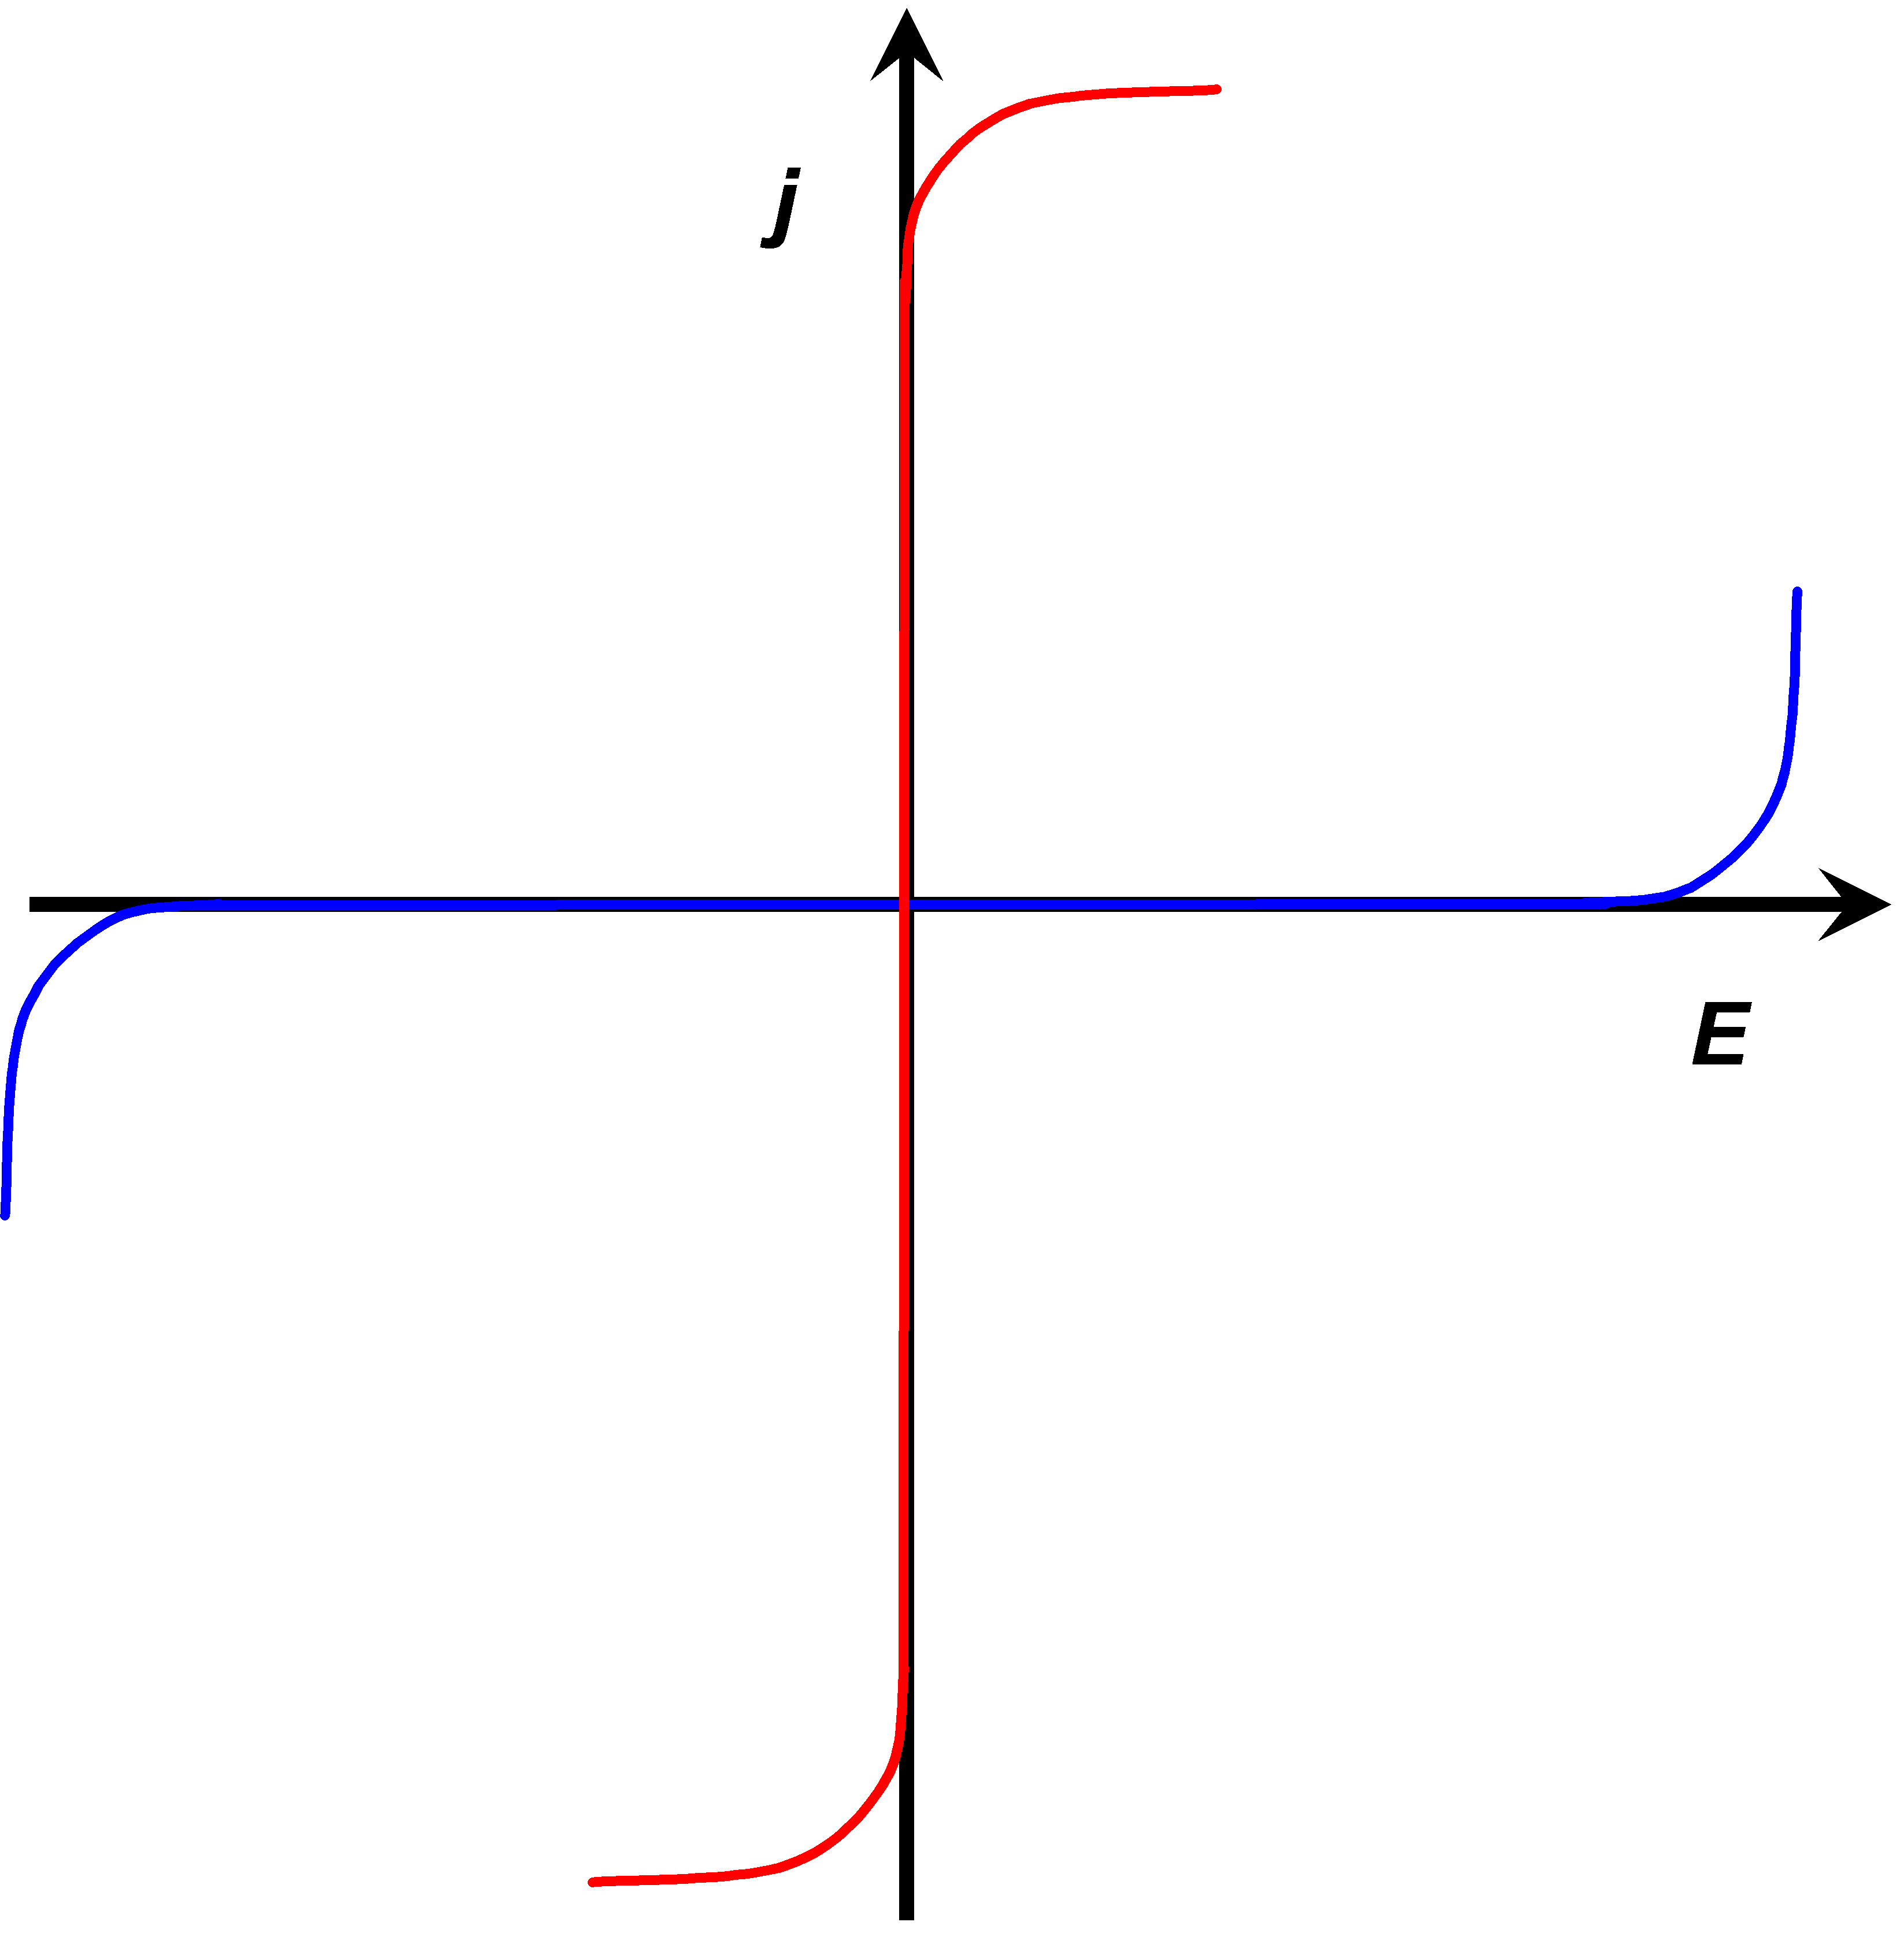 Current-voltage curves of nearly ideally non-polarizable (red) and polarizable (blue) electrode.